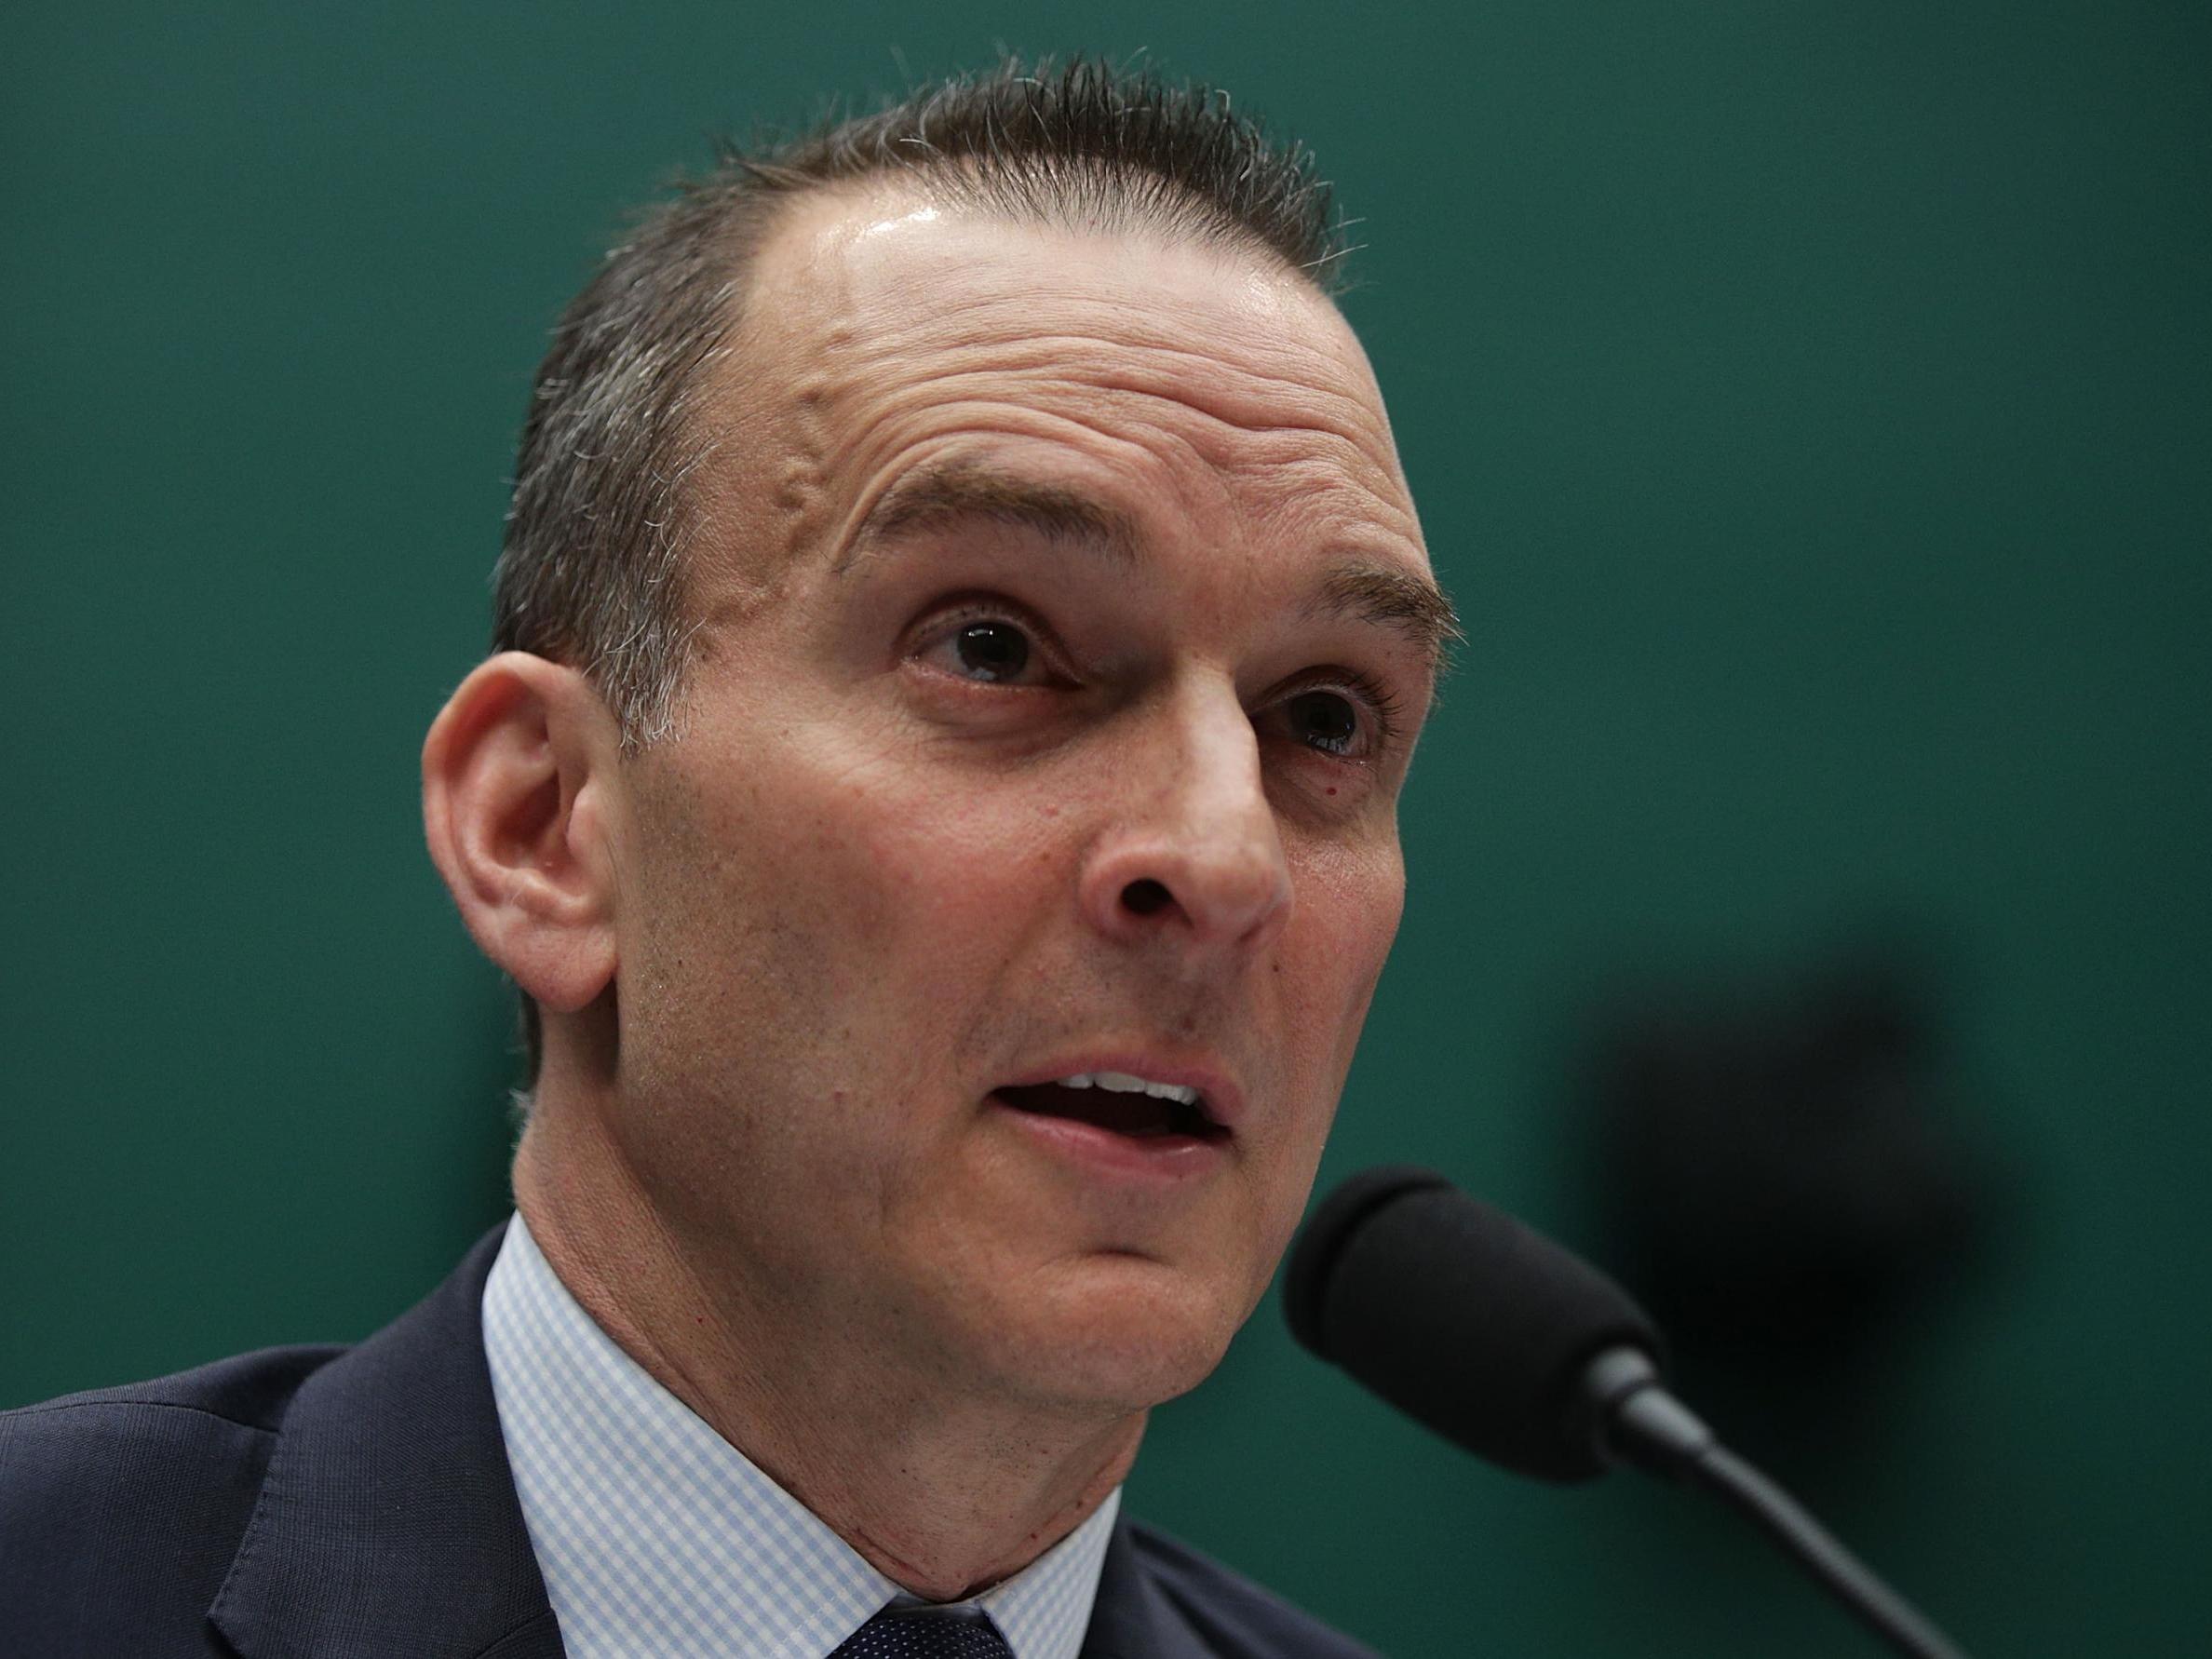 United States Anti-Doping Agency chief executive Travis Tygart has described the episode as 'a total joke and an embarrassment for Wada and the global anti-doping system'